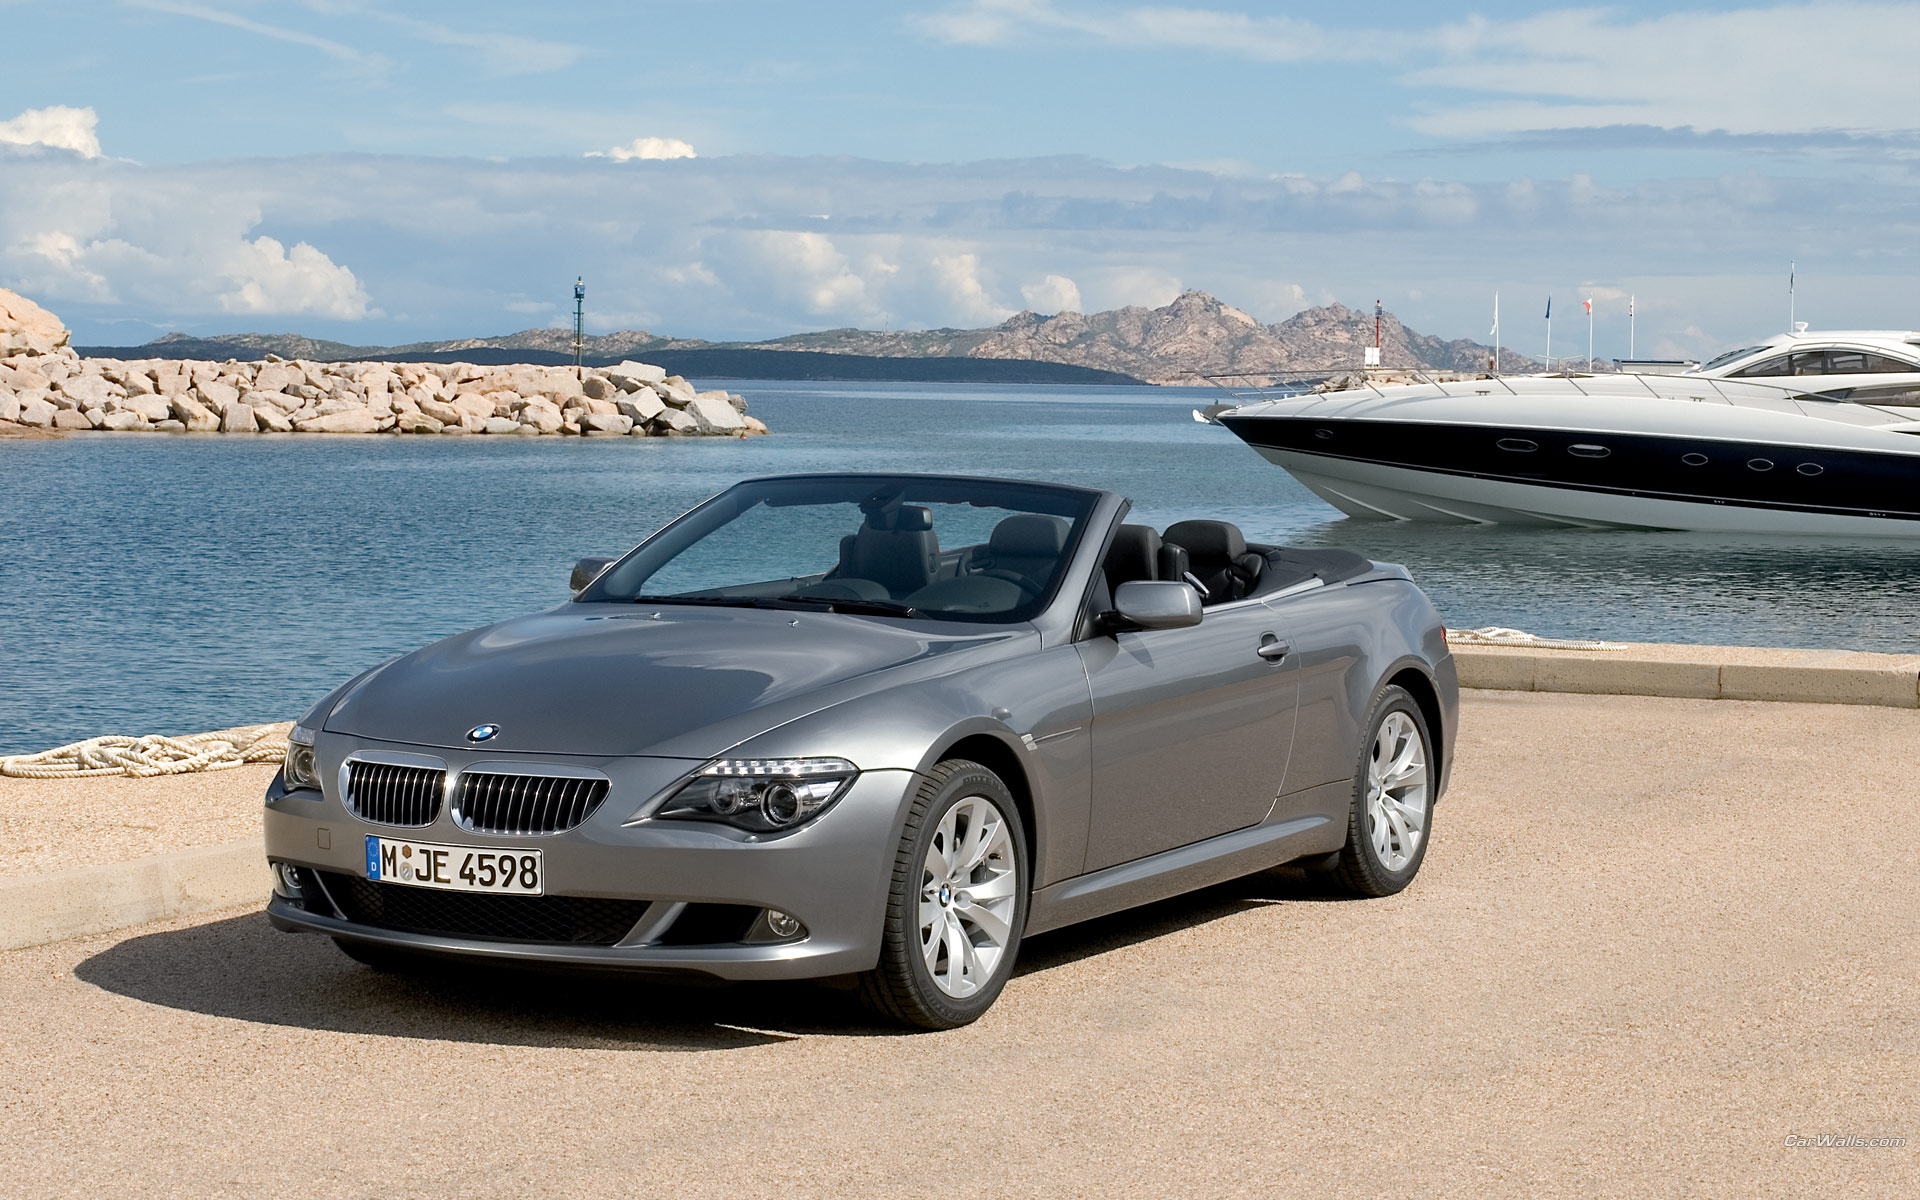 Download full size 6 series cabriolet Bmw wallpaper / 1920x1200